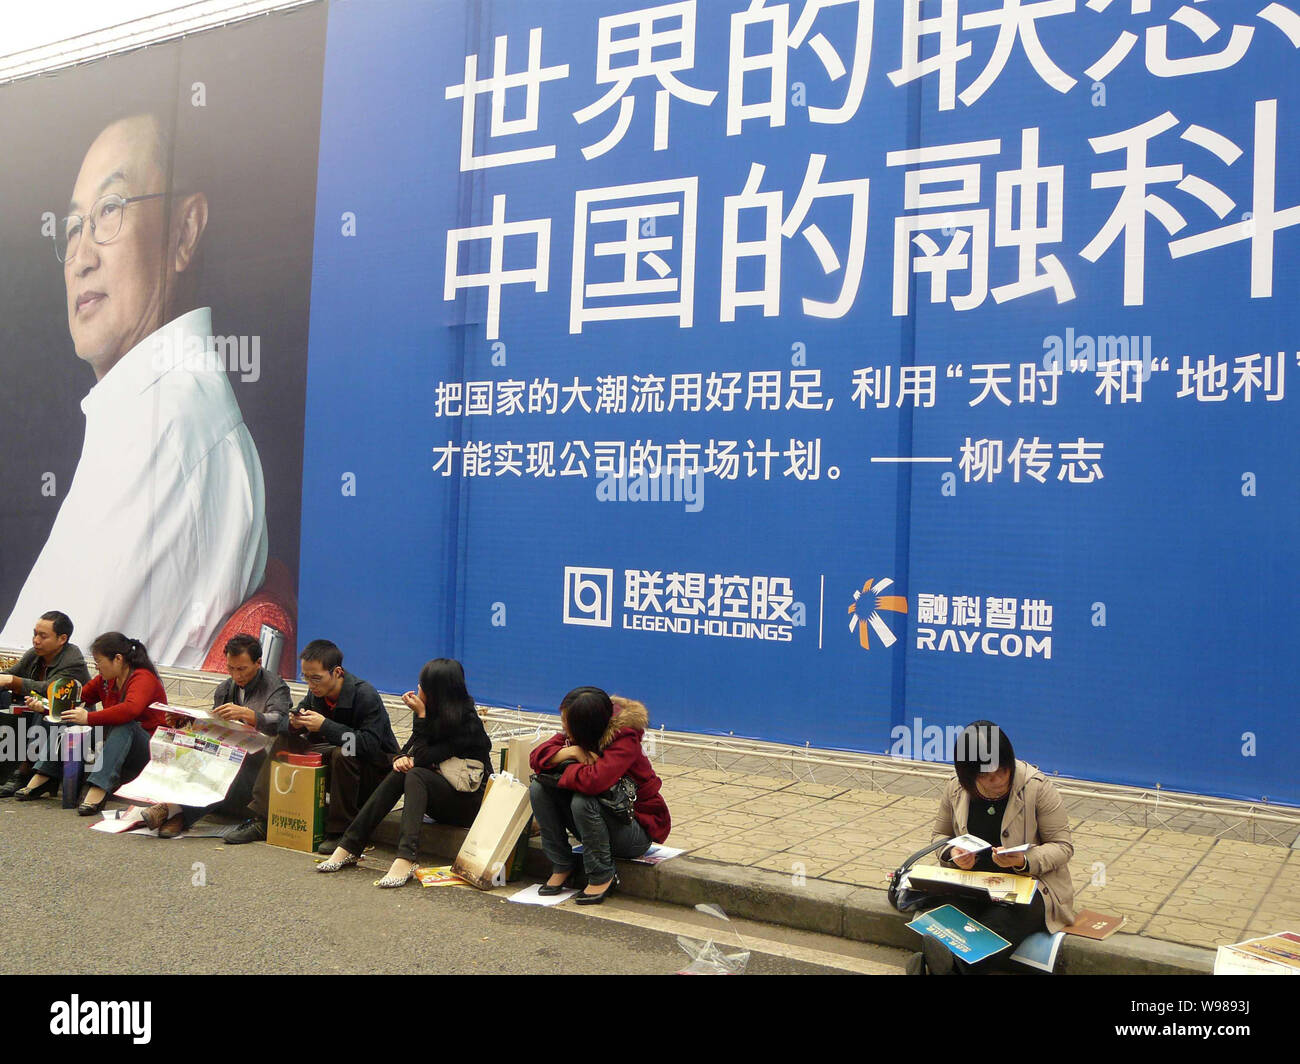 File--Local residents sit in front of an advertisement of Legend Holdings  with a picture of Liu Chuanzhi, Chairman of Legend Holdings Ltd, during a  Stock Photo - Alamy